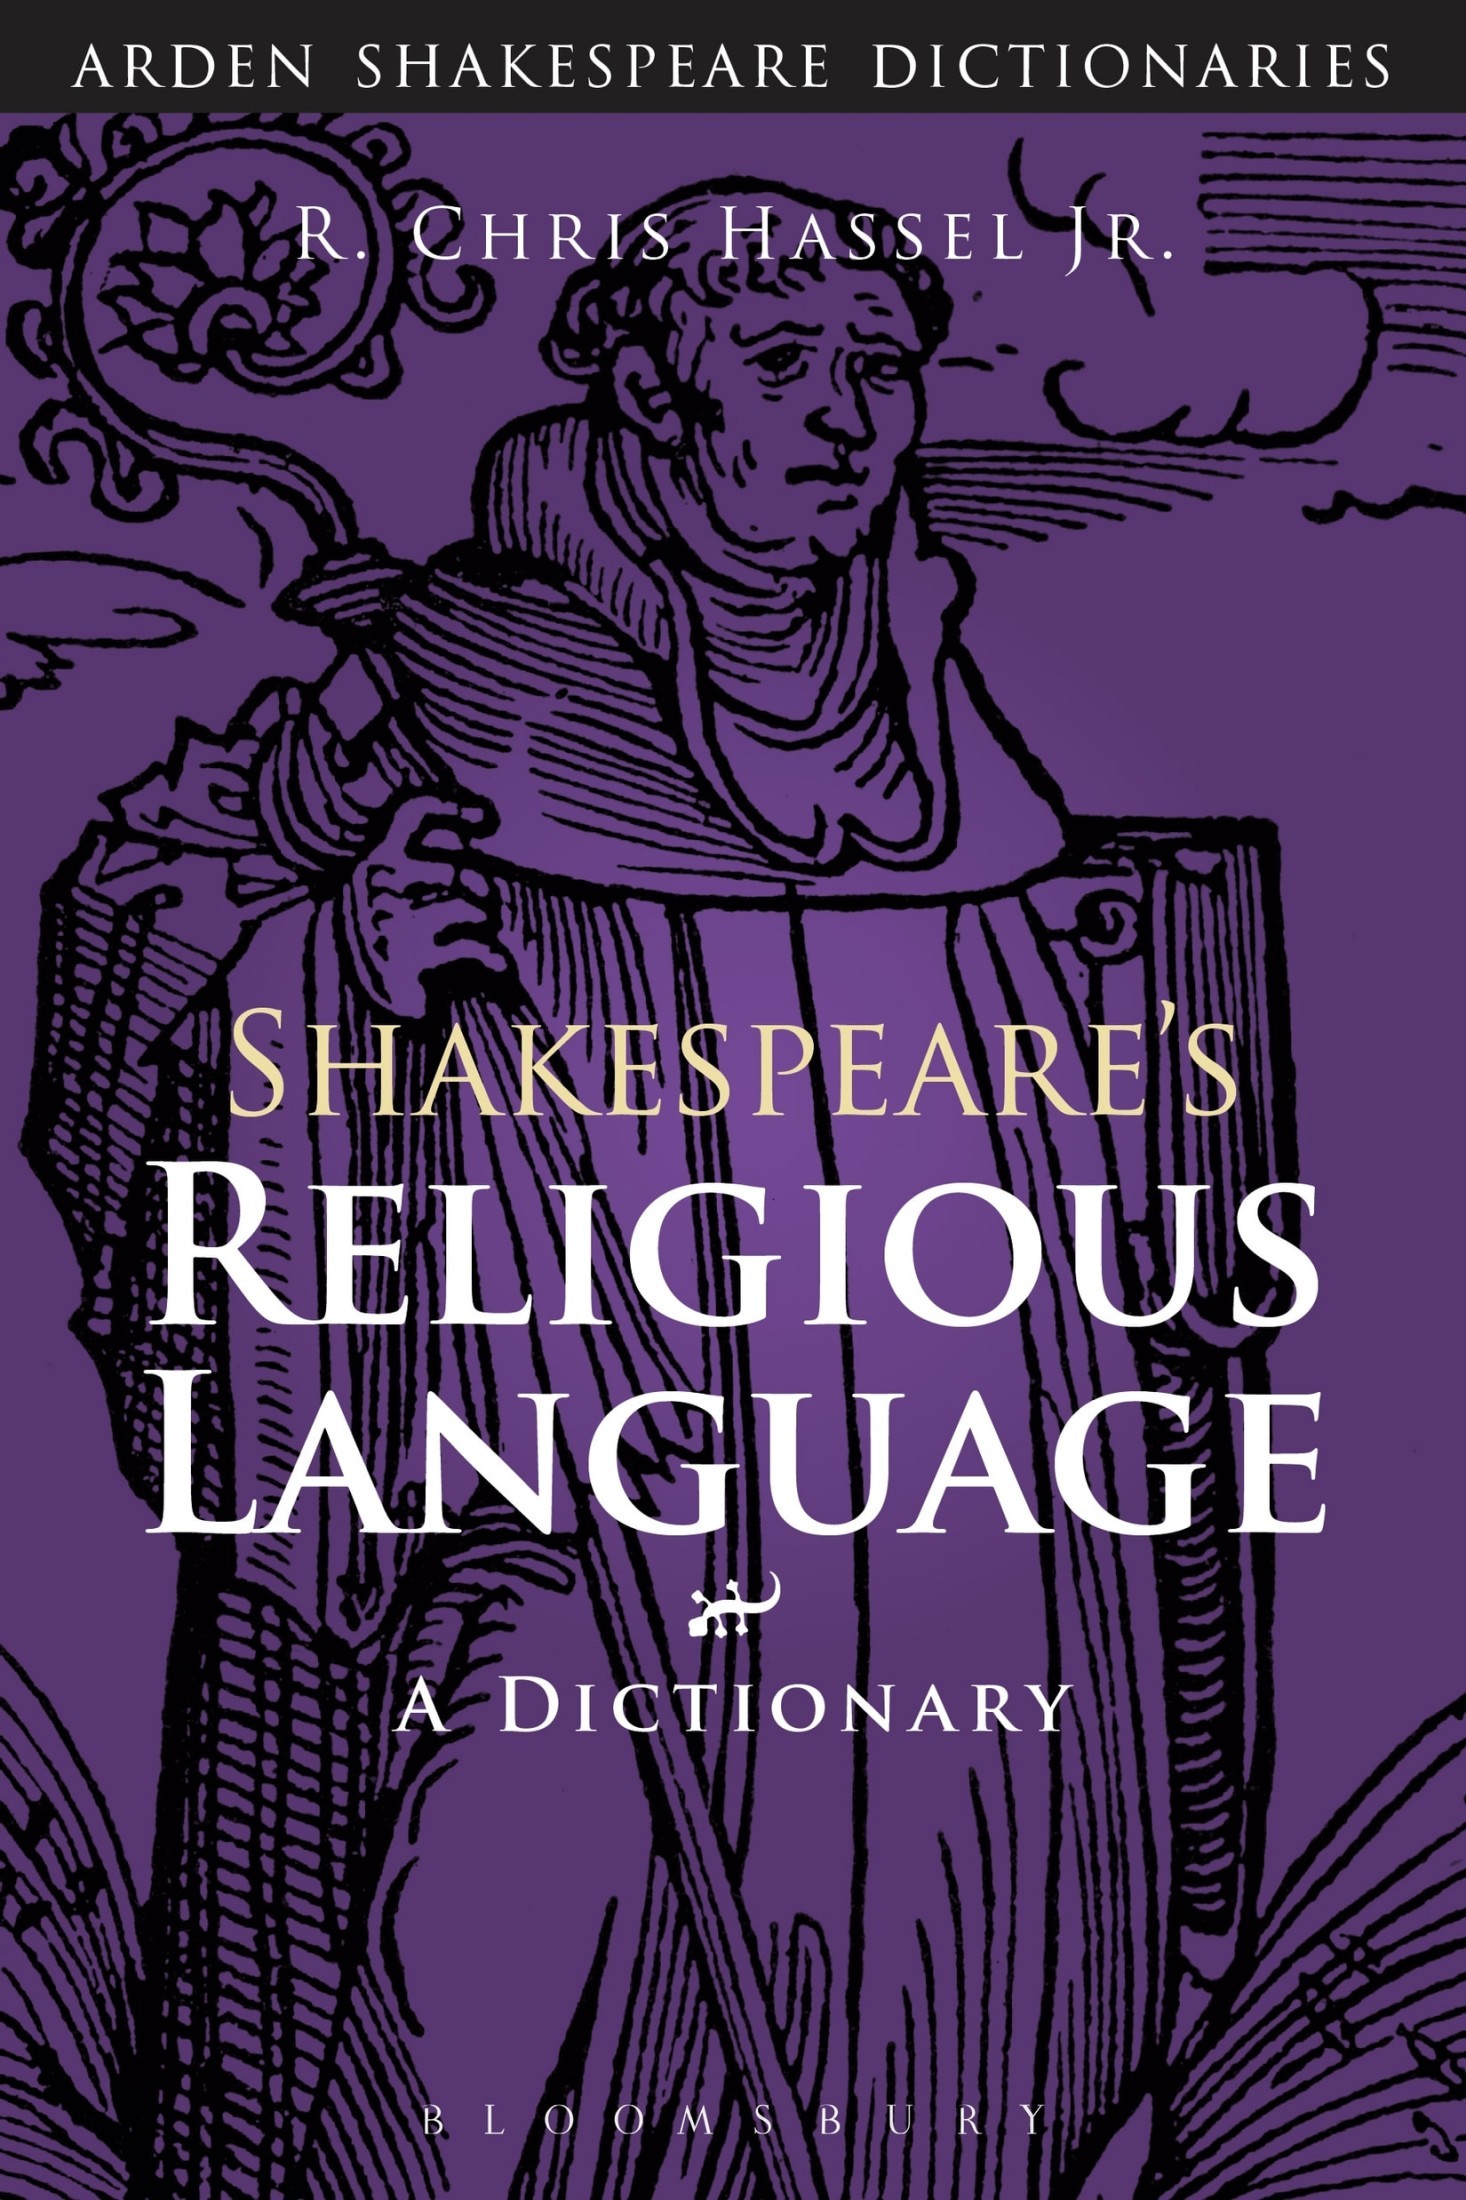 Shakespeare's Religious Language: A Dictionary